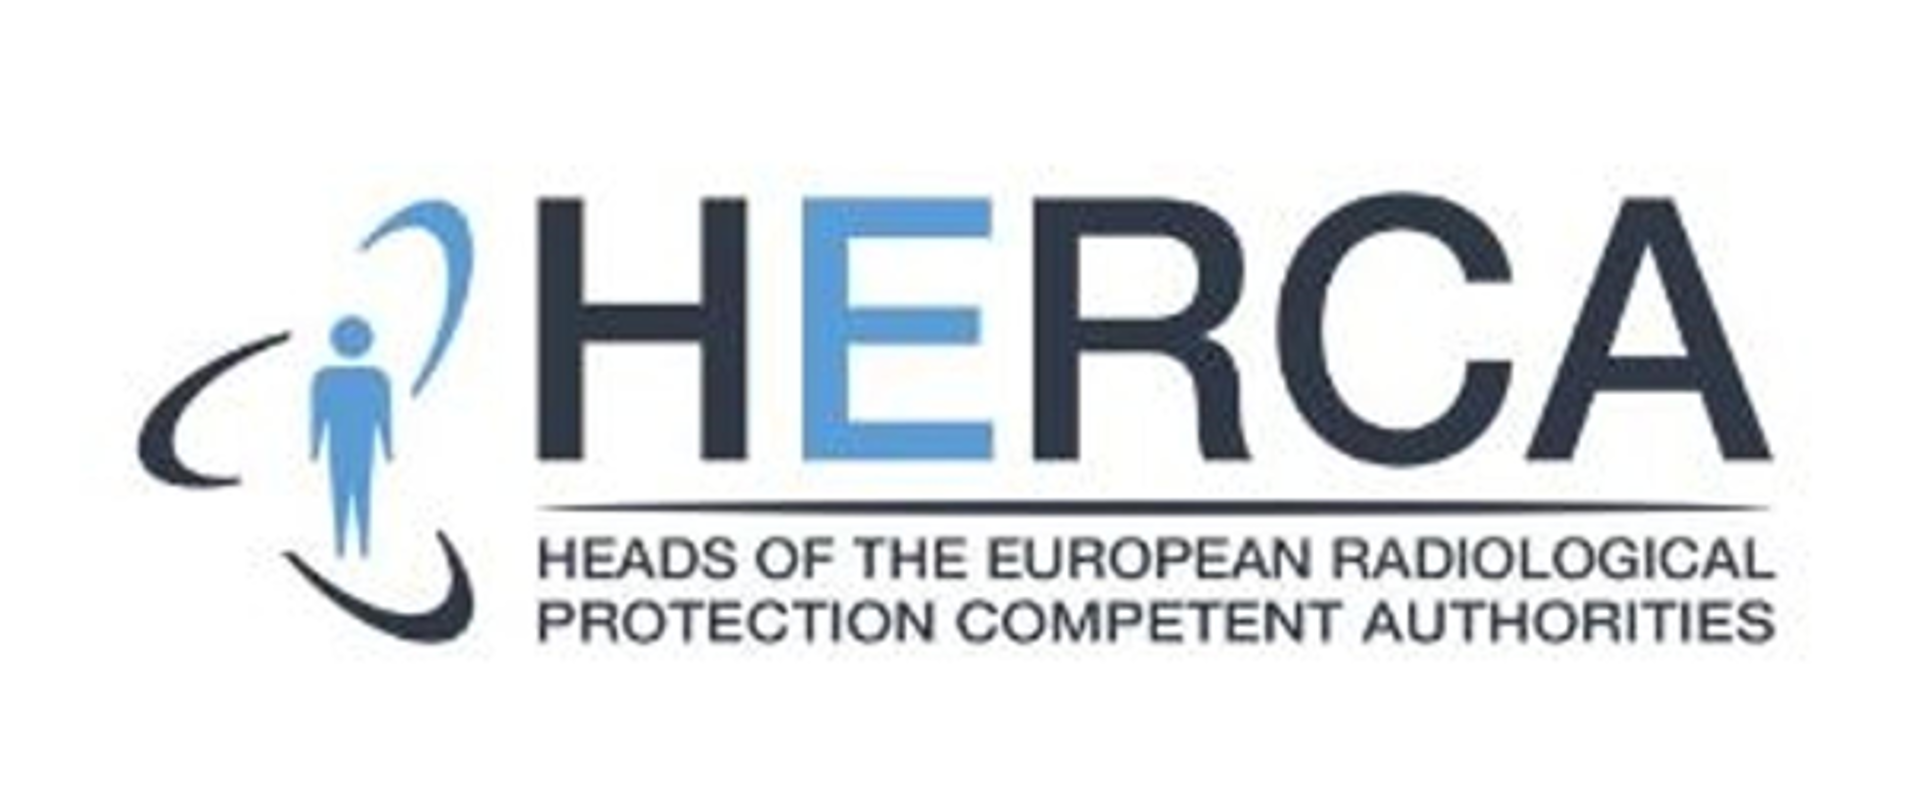 Heads of the European Radiological Protection Competent Authorities